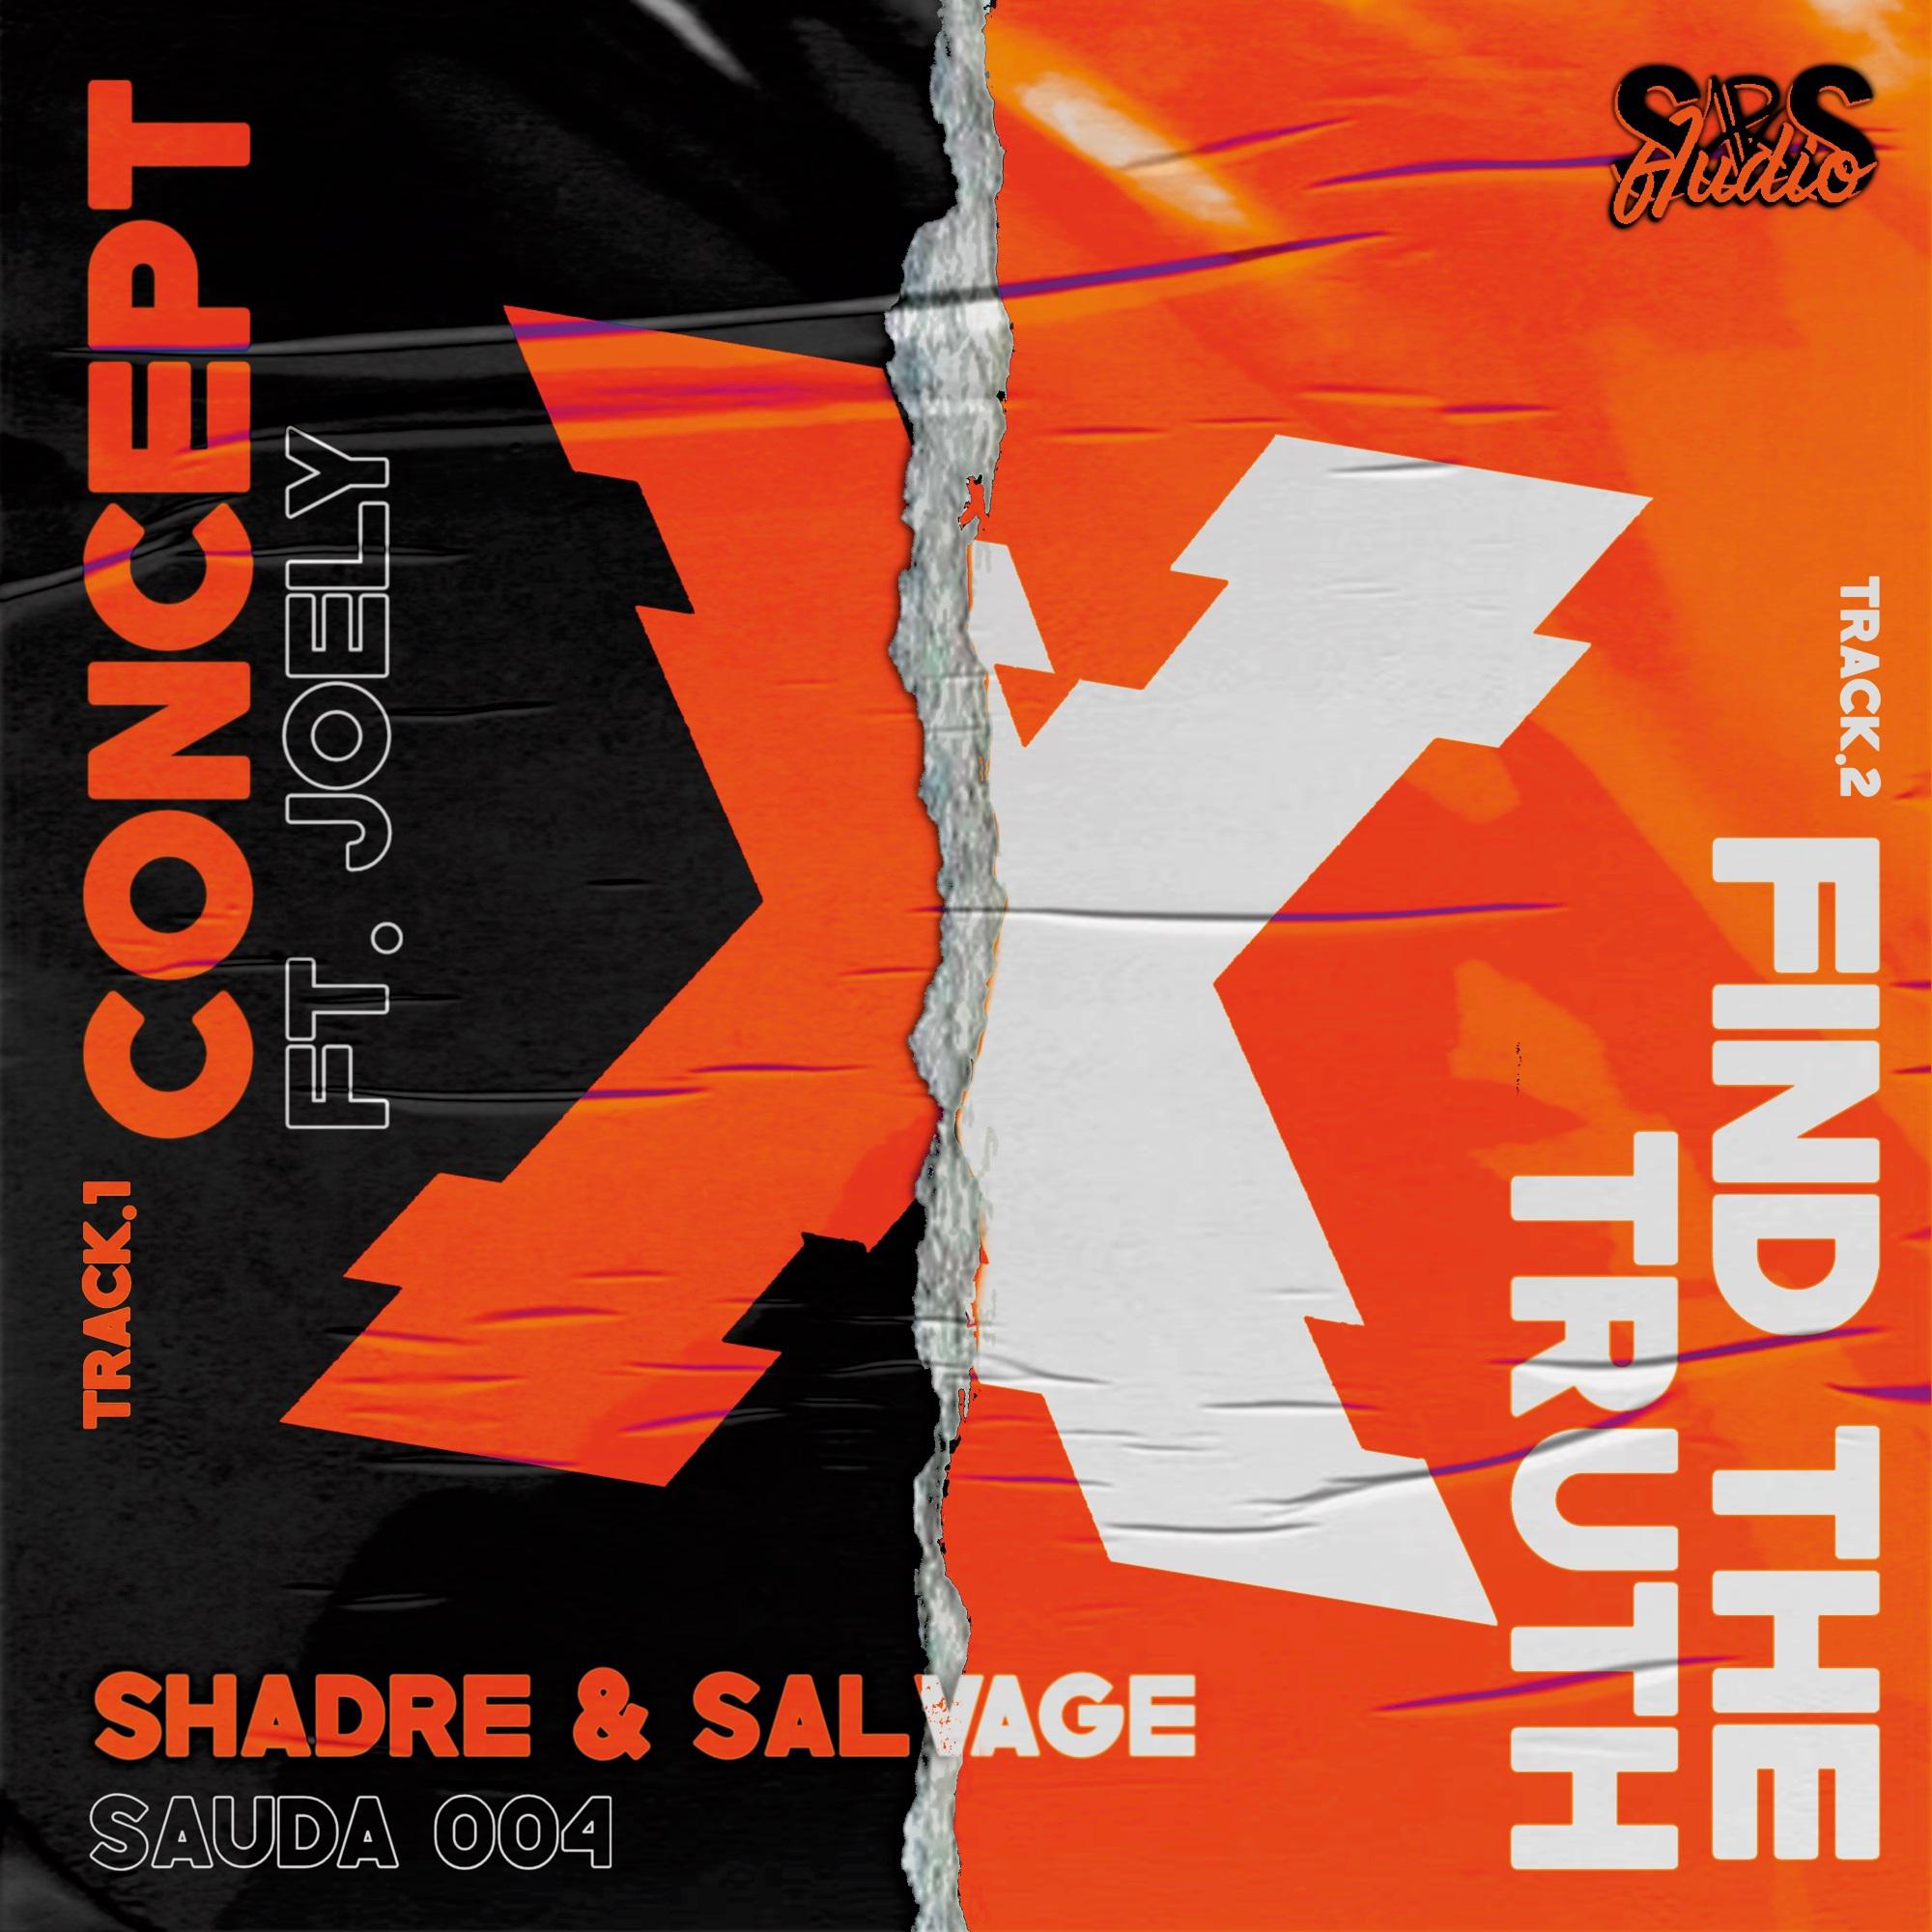 Shadre - Concept Ft. Joely